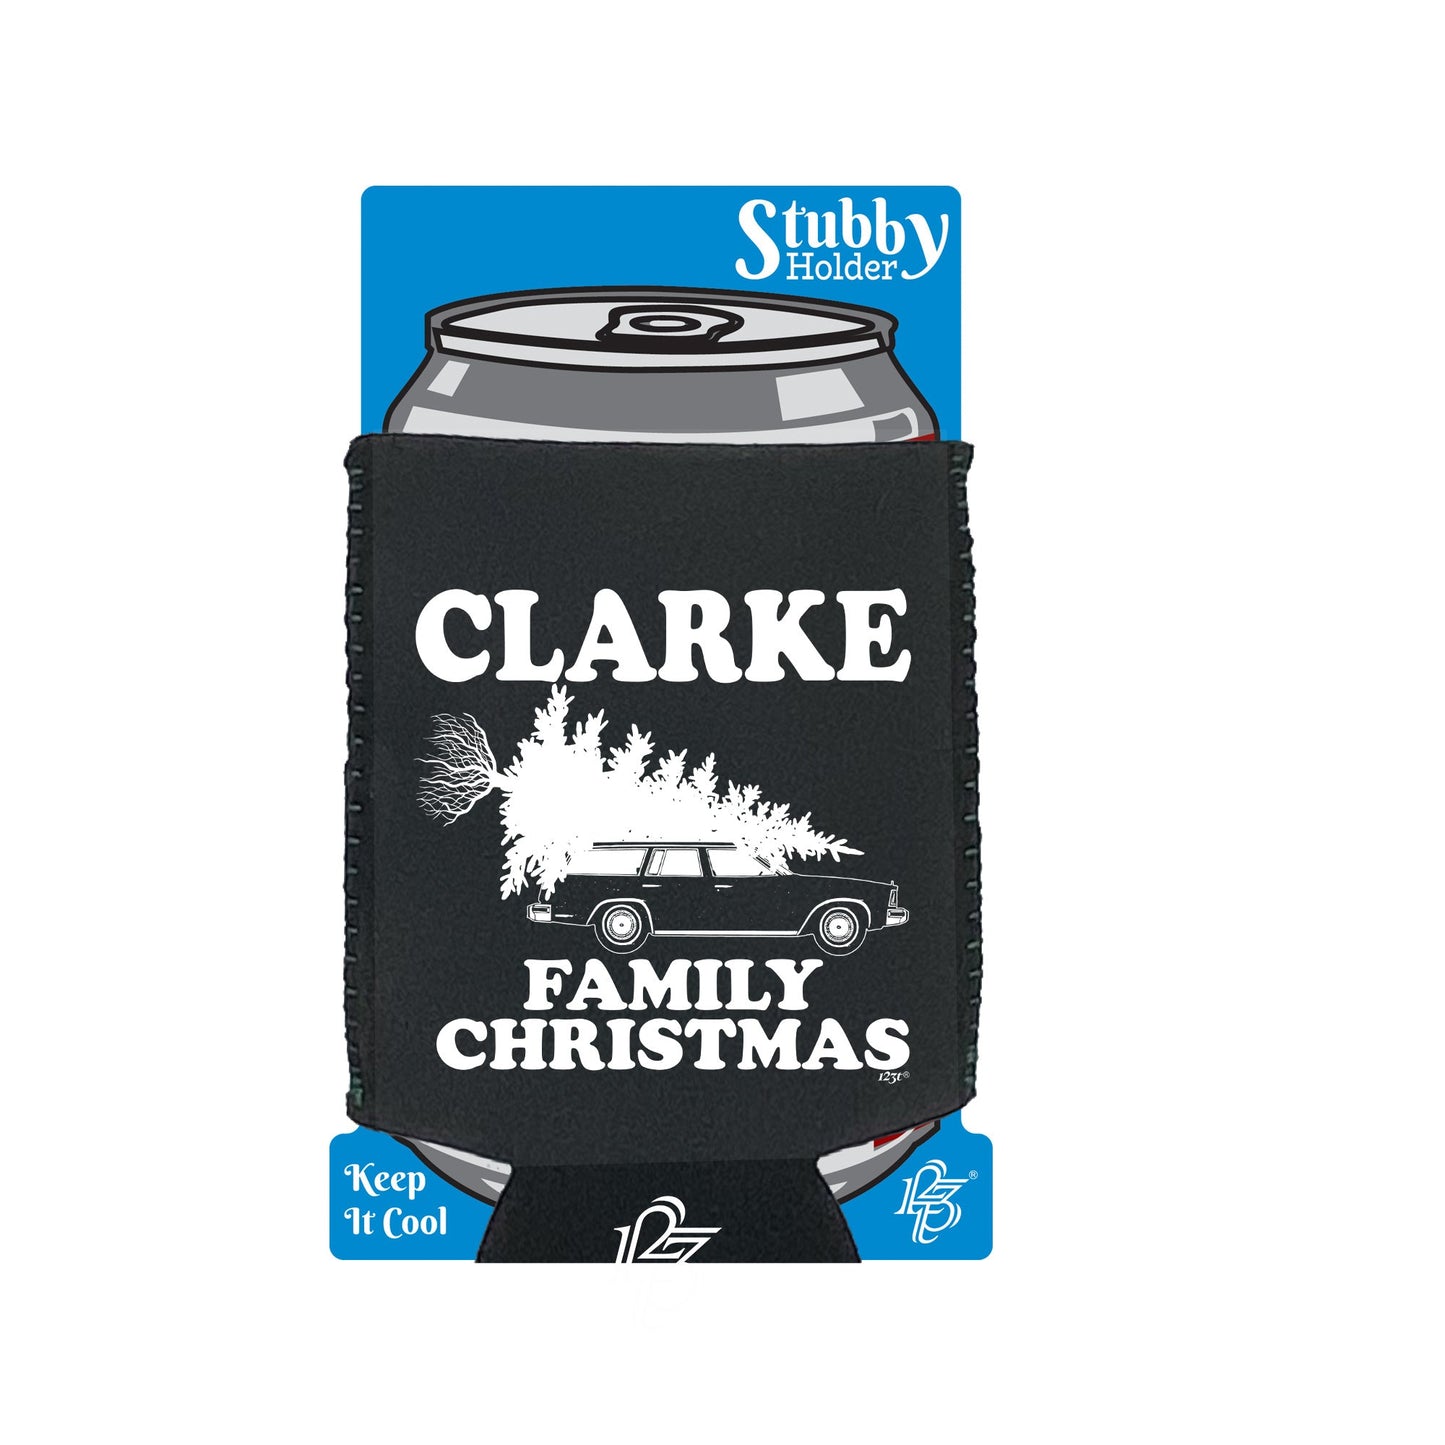 Family Christmas Clarke - Funny Stubby Holder With Base